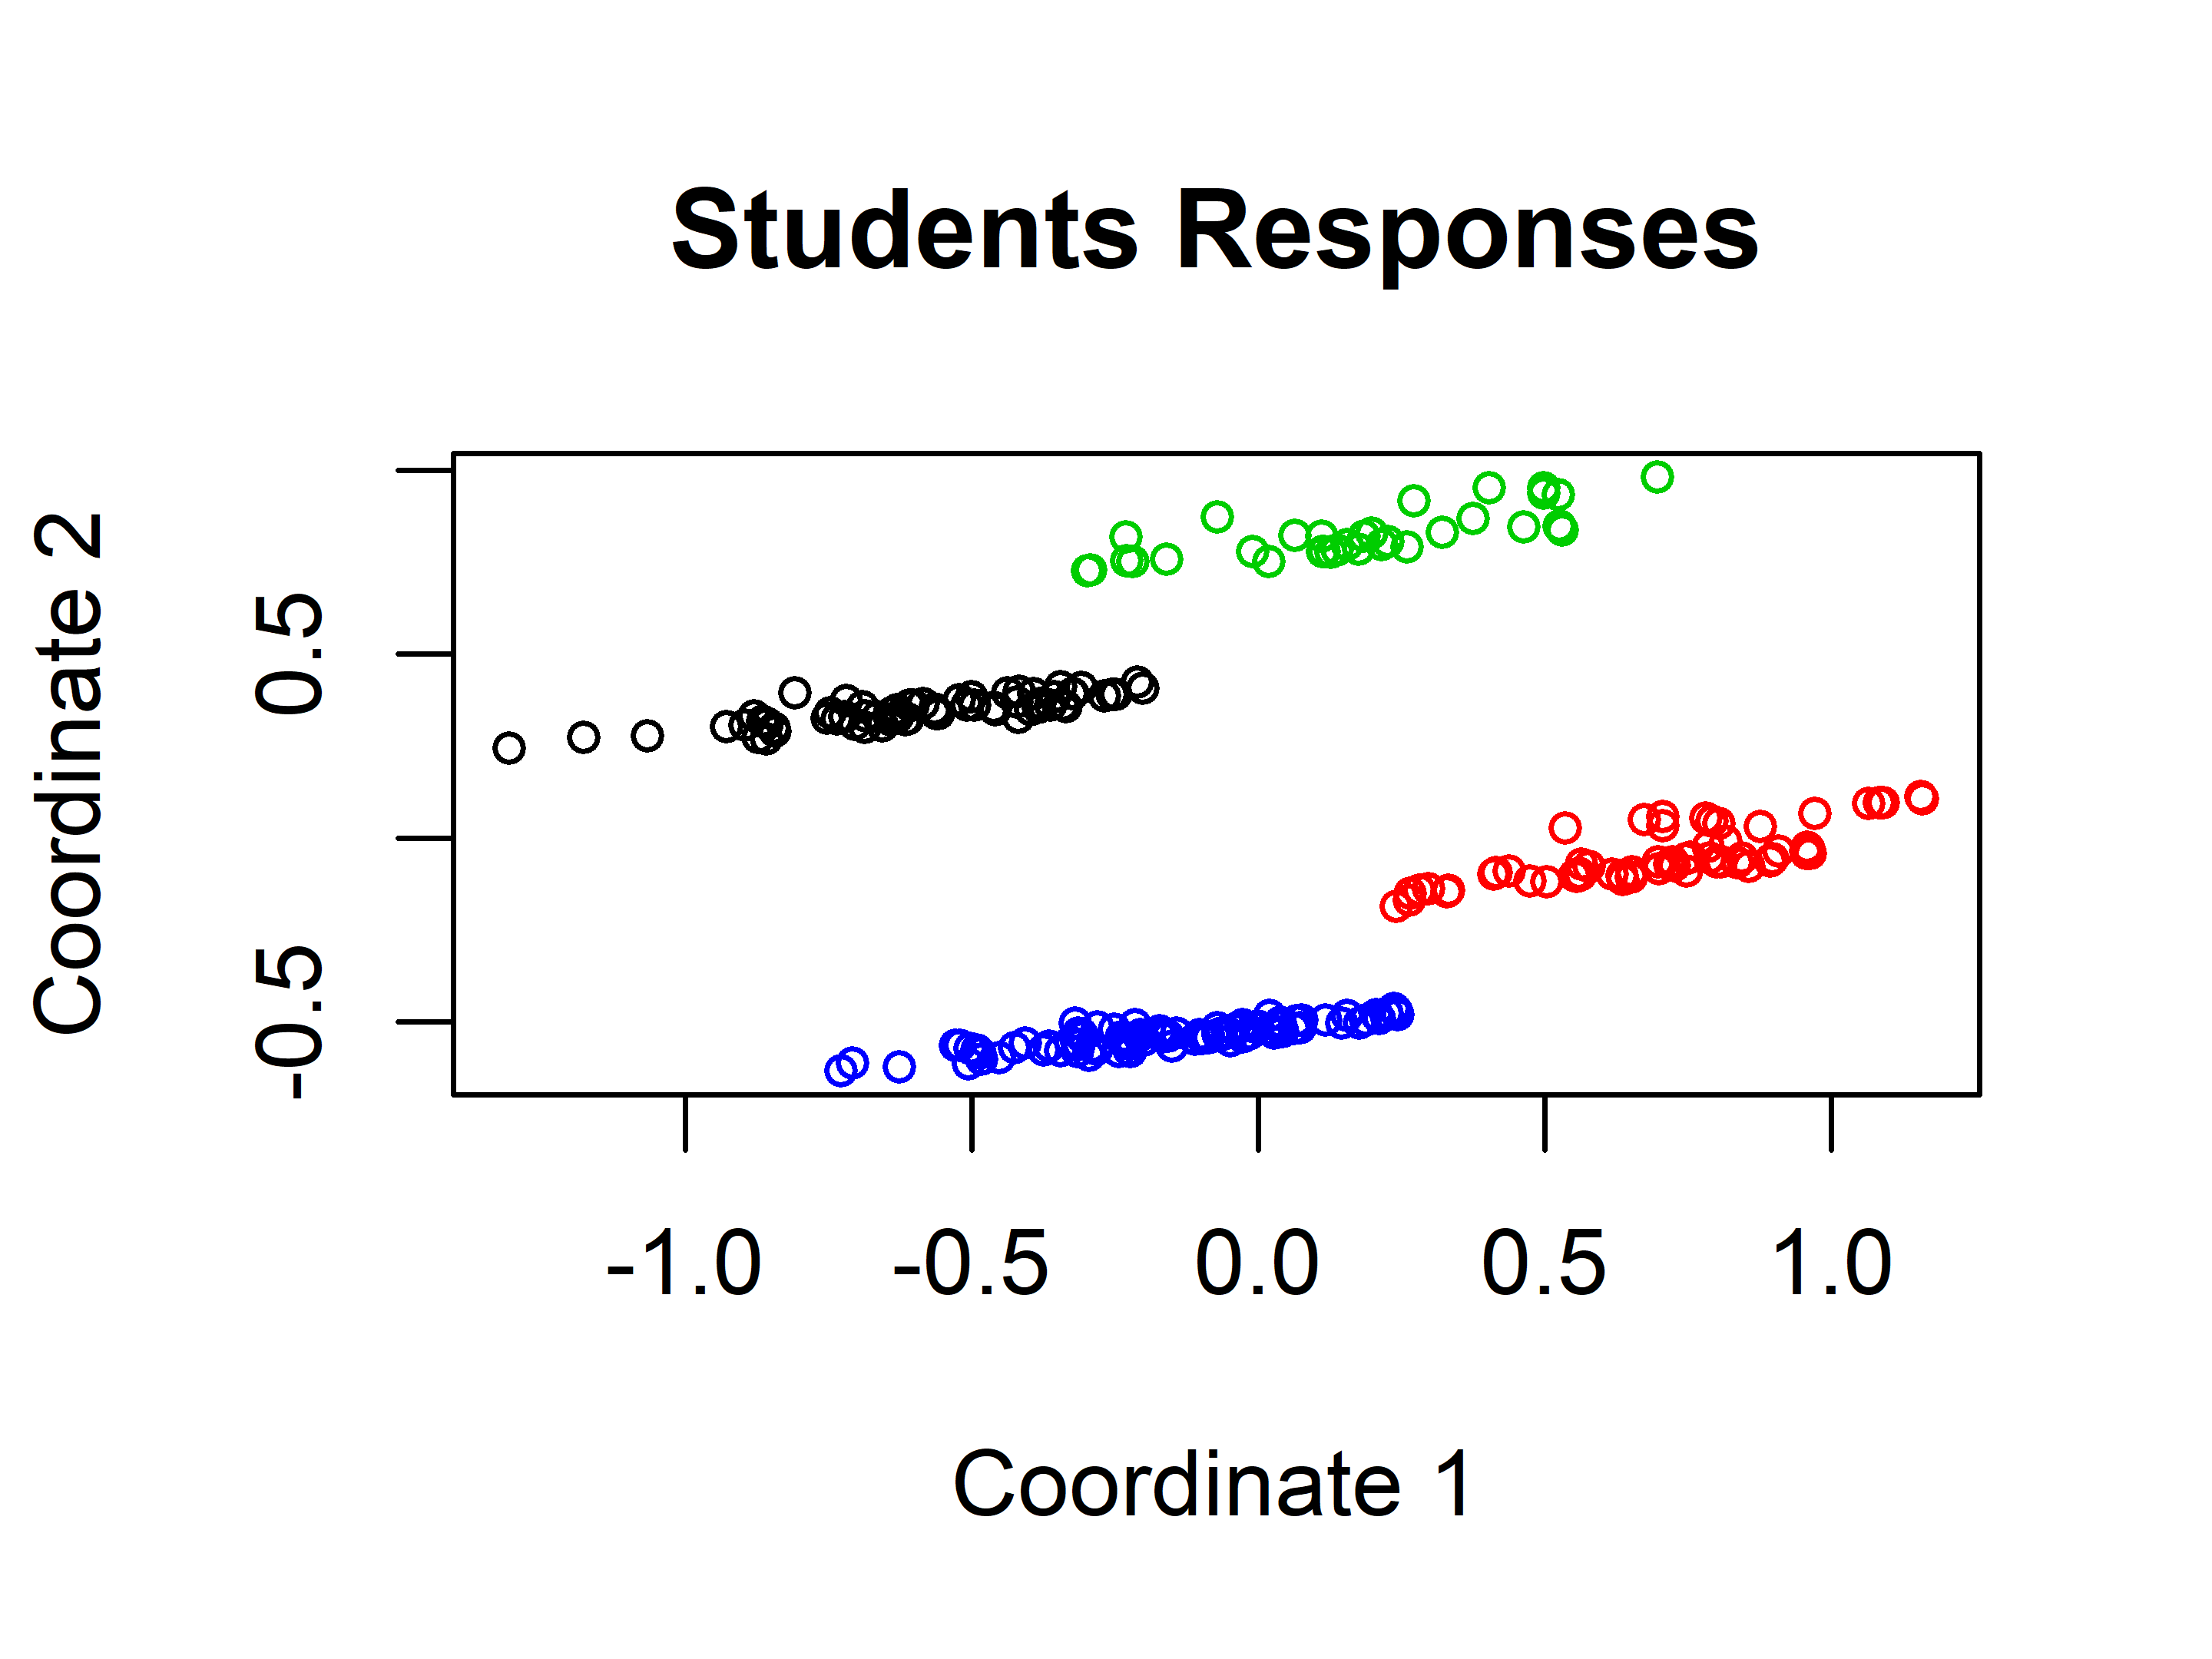 Students responses groups when \(k=4\).